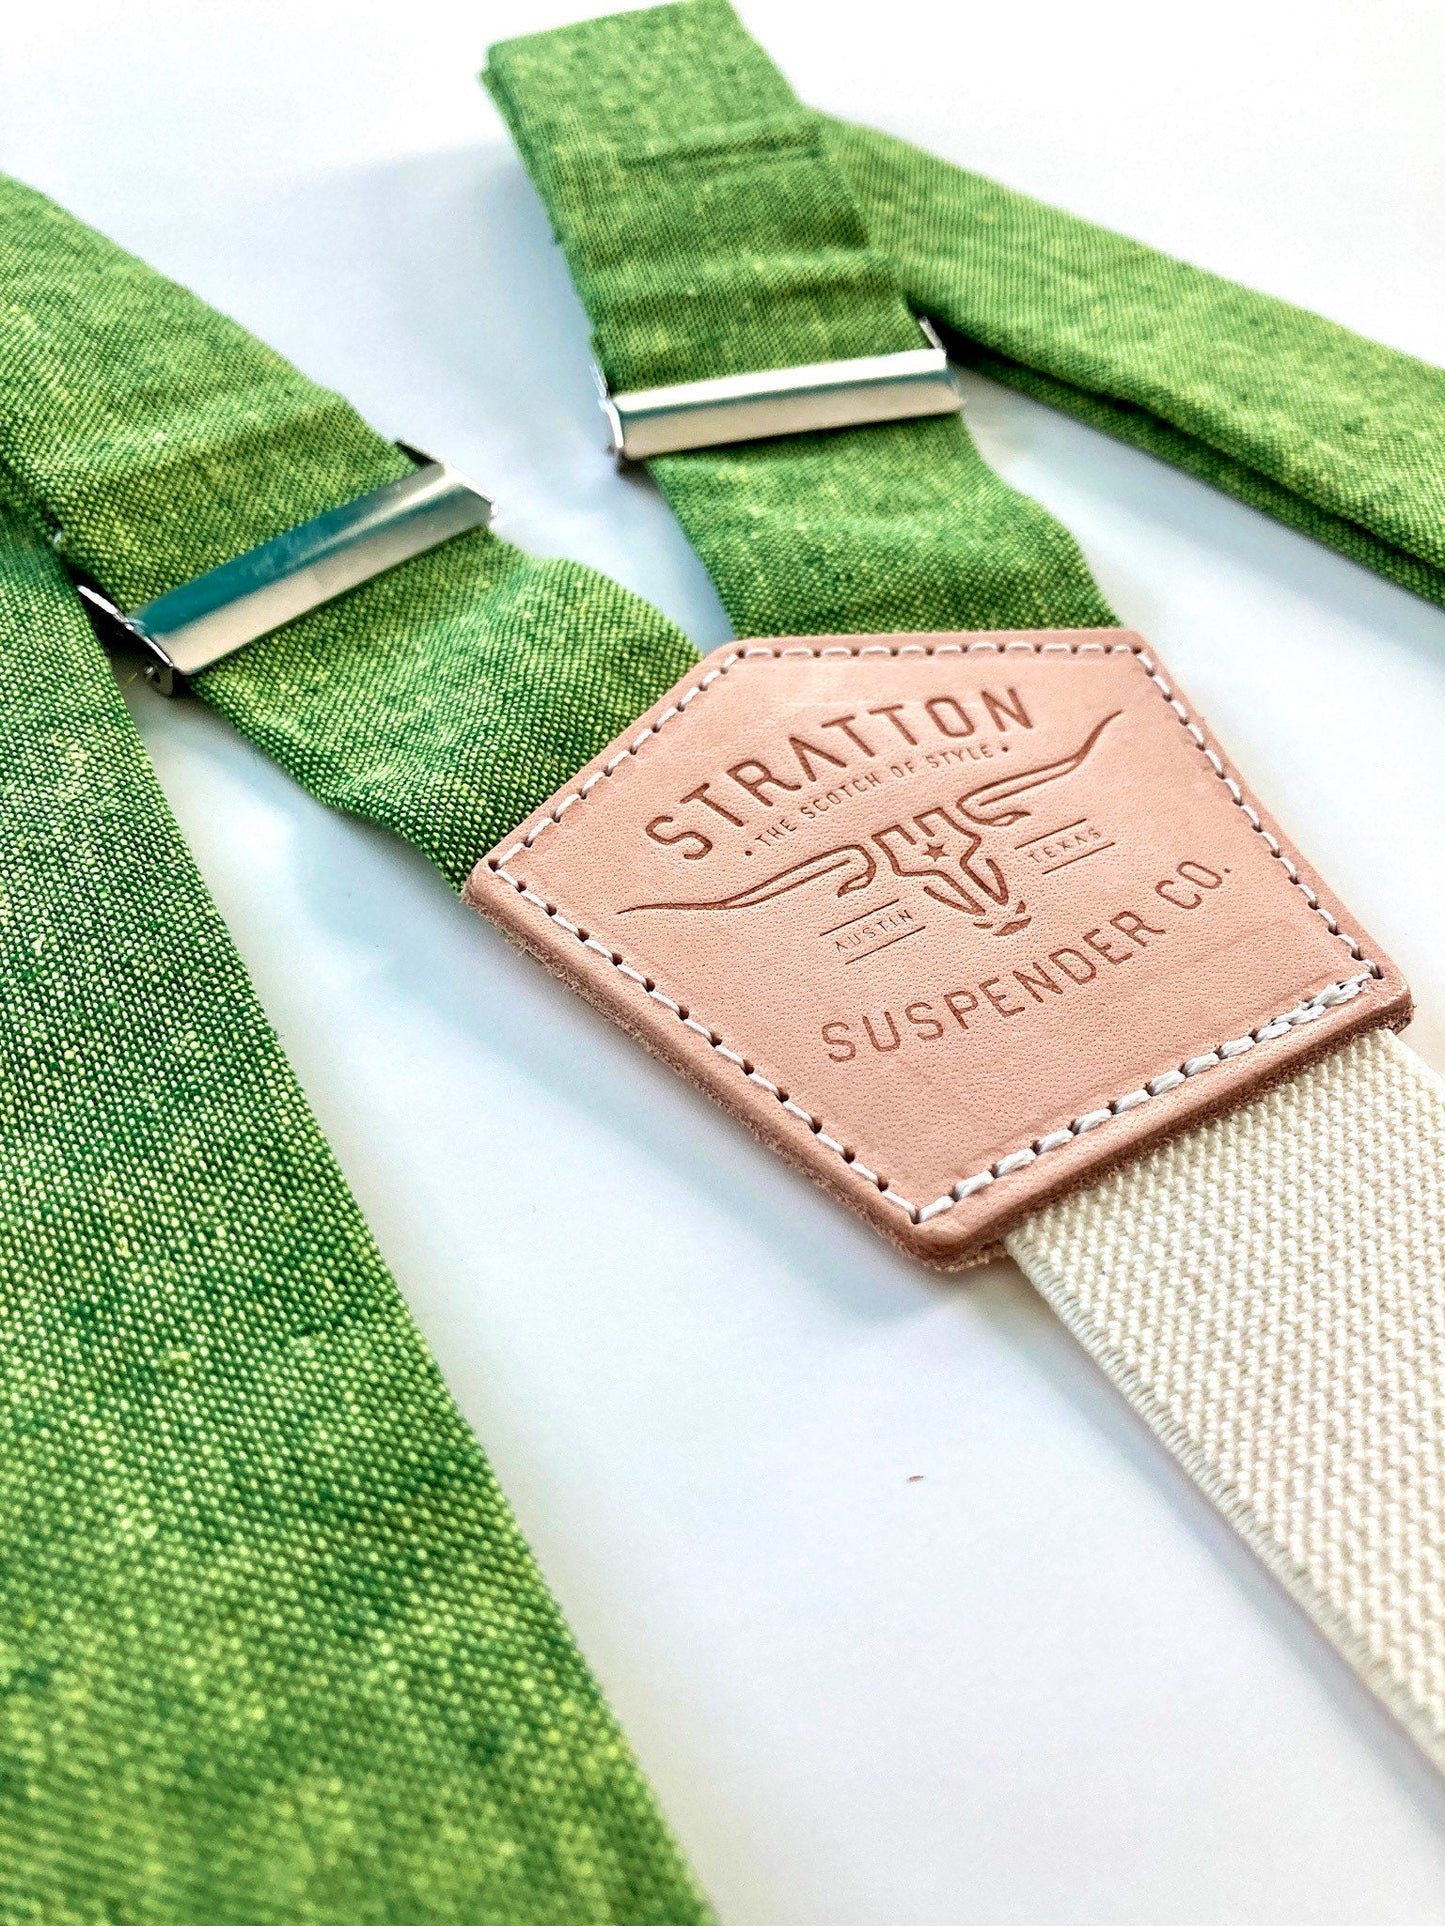 Stratton Suspender Co. features the Spruce bright green linen suspenders on veg tan shoulder leather with cream colored elastic back strap for the Fall 2022 suspenders collection 